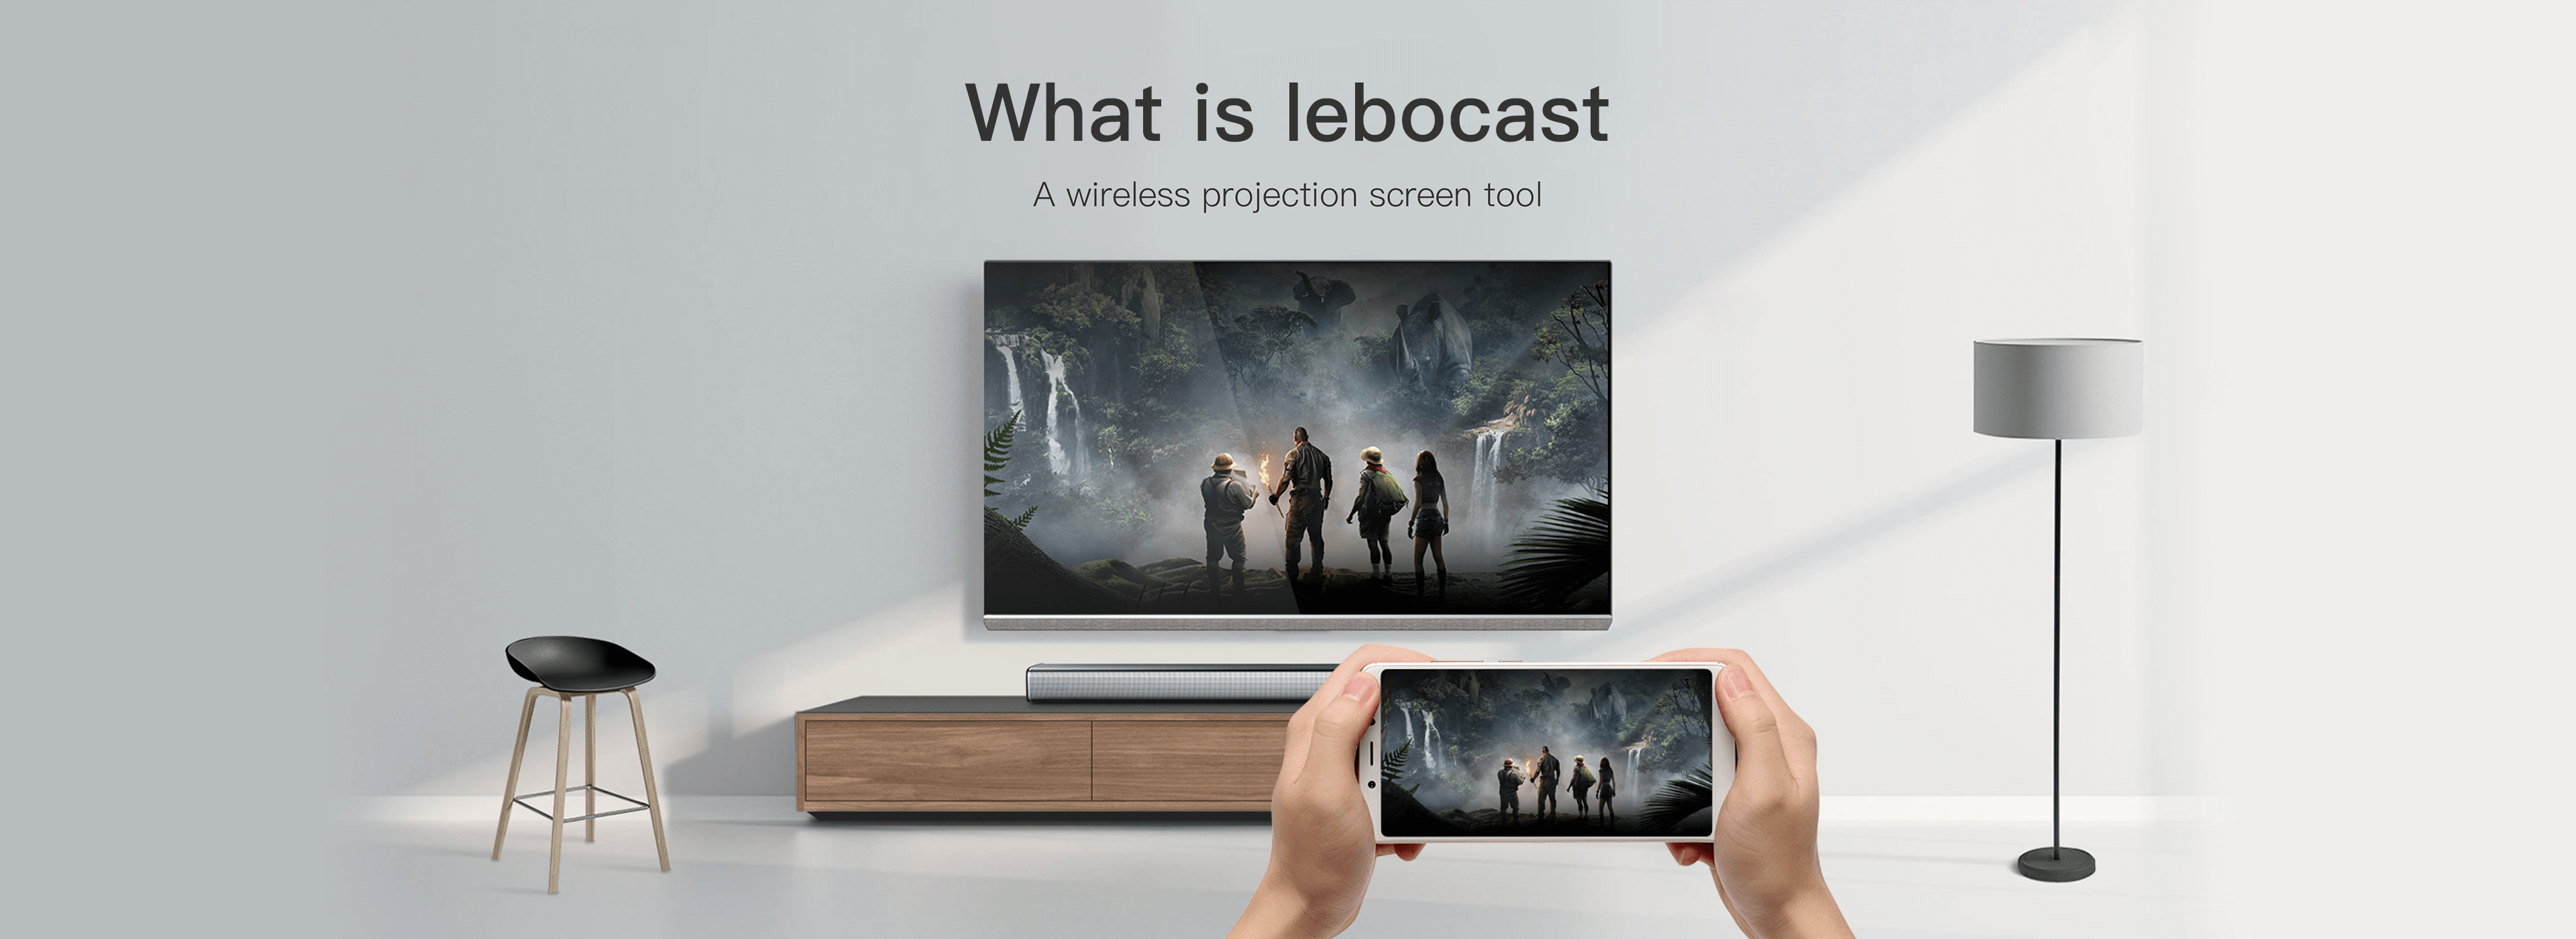 What is Lebocast? What is the screen mirroring tool? Introduction to Lebocast. How to use Lebocast? With just one click, you can connect Lebocast to the screen.